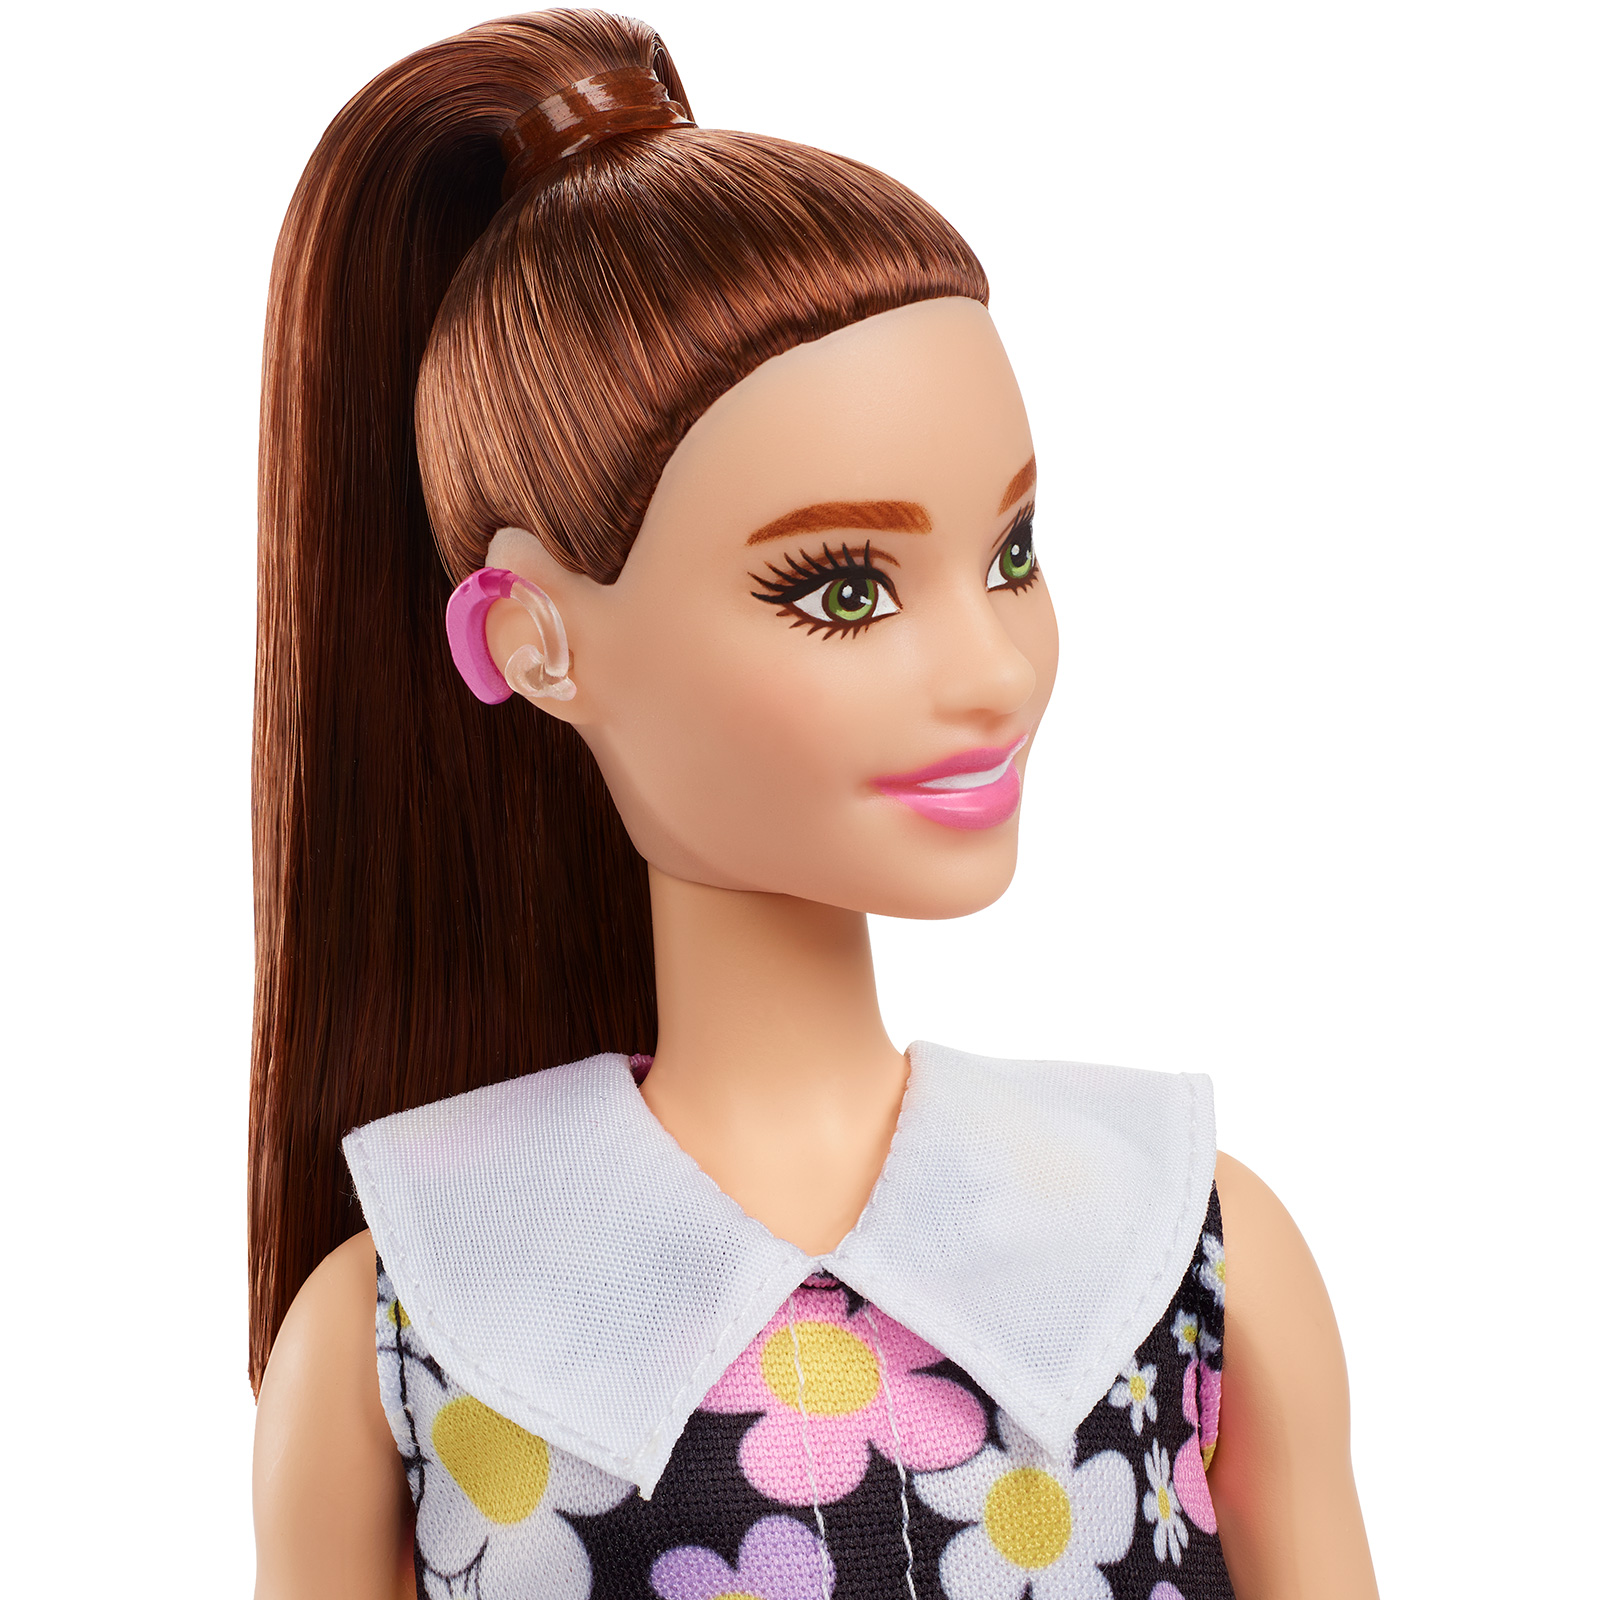 Barbie unveils its first-ever doll hearing aids Style